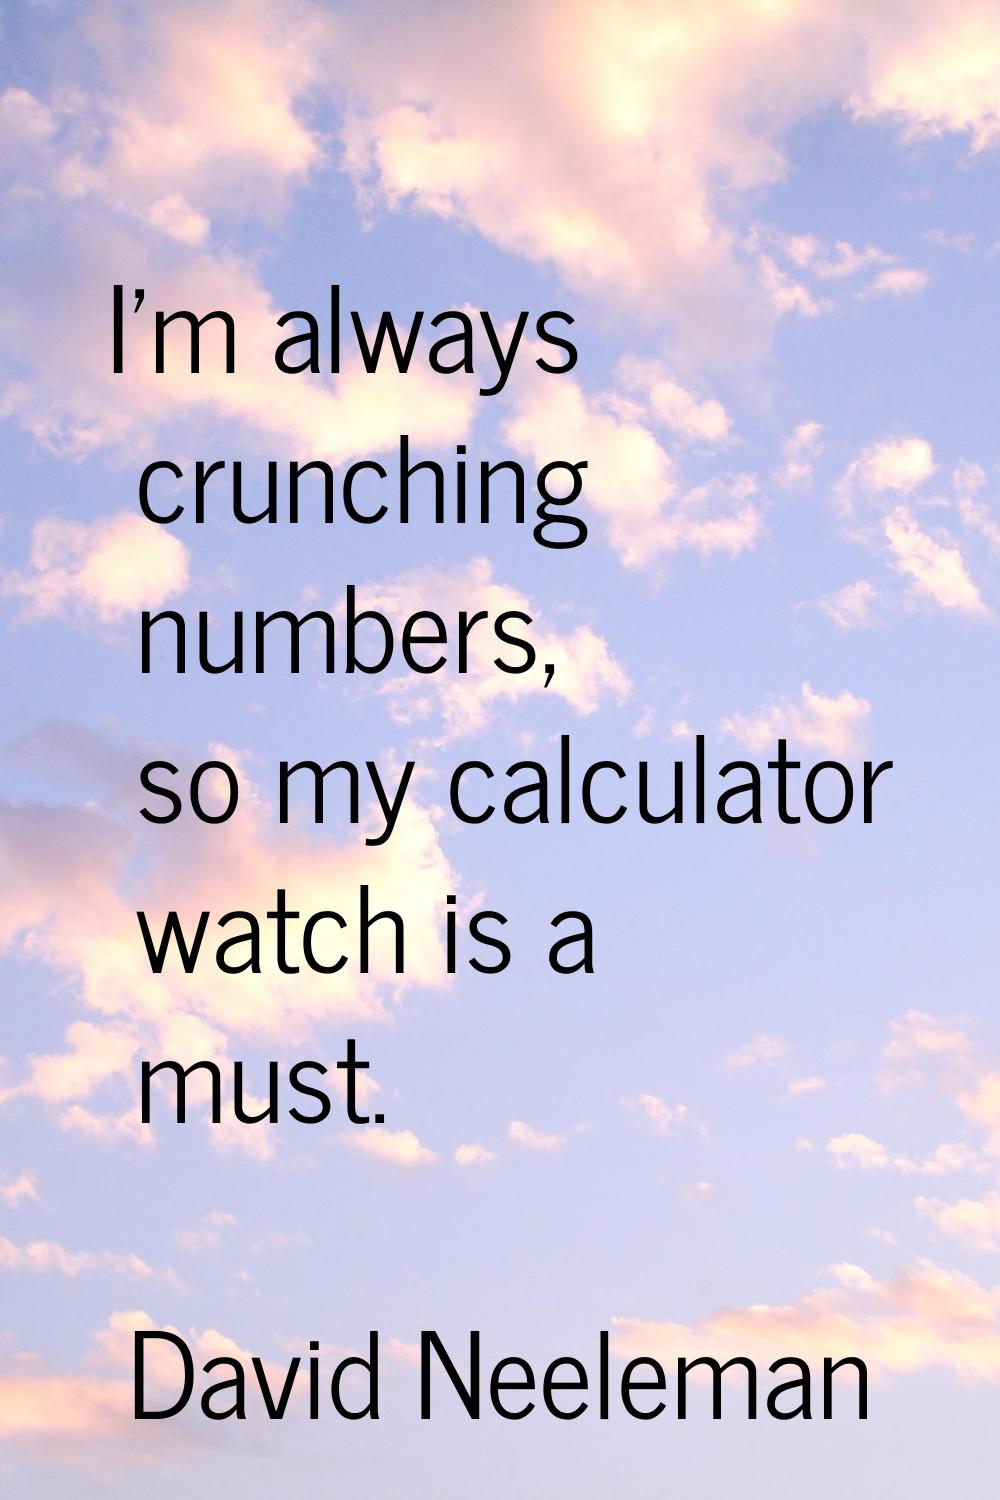 I'm always crunching numbers, so my calculator watch is a must.